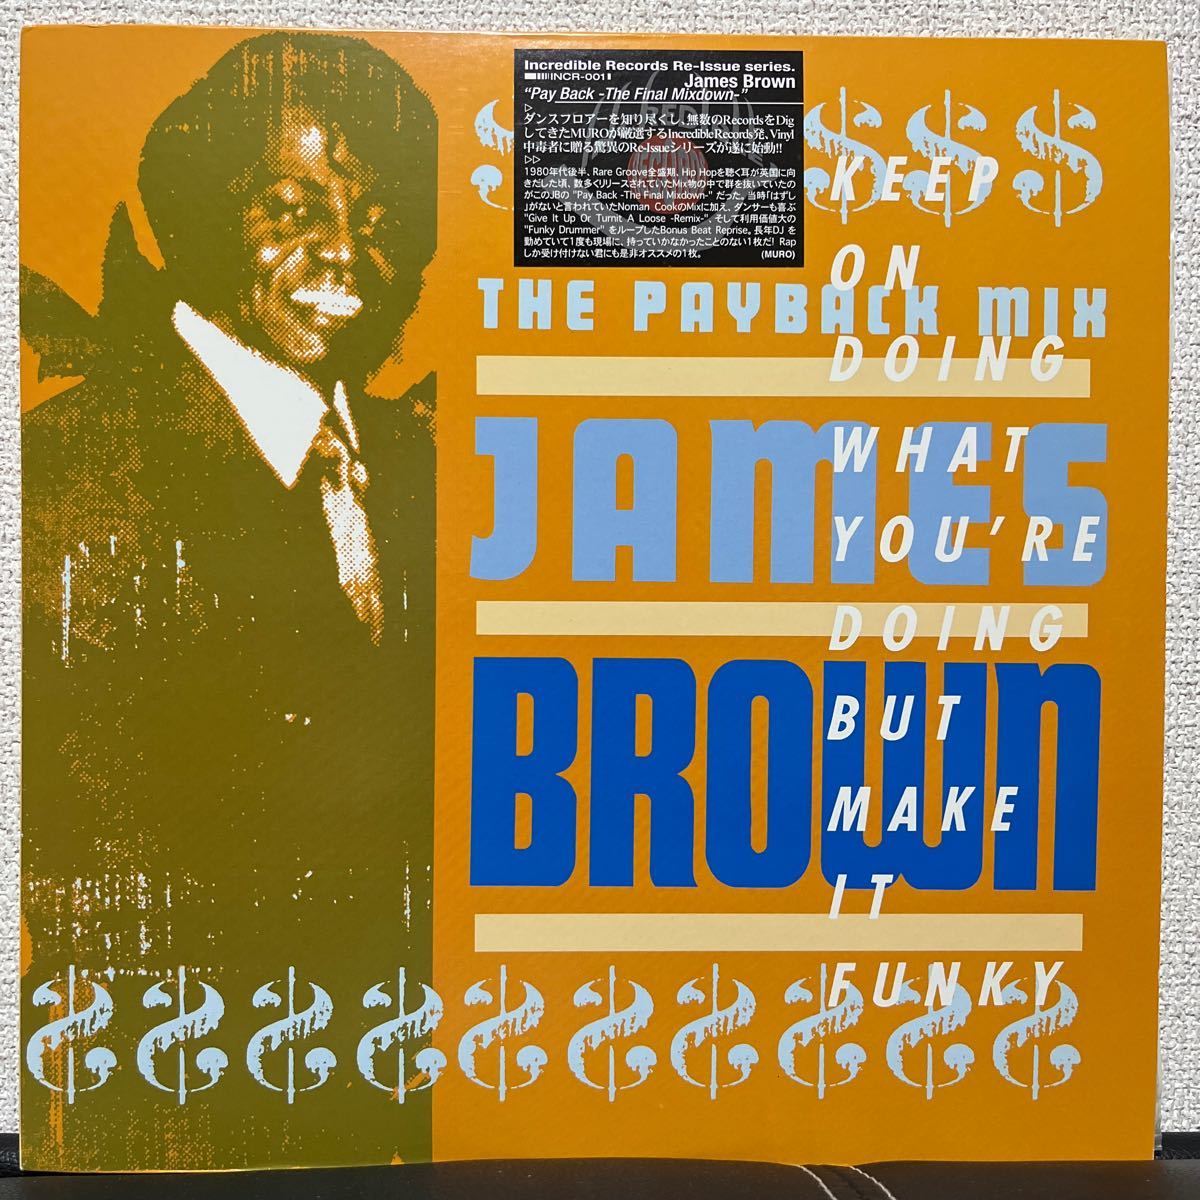 james brown / the payback cr602ho332312 funky drummer give it up or turnit a loose ジェームスブラウン muro_画像1